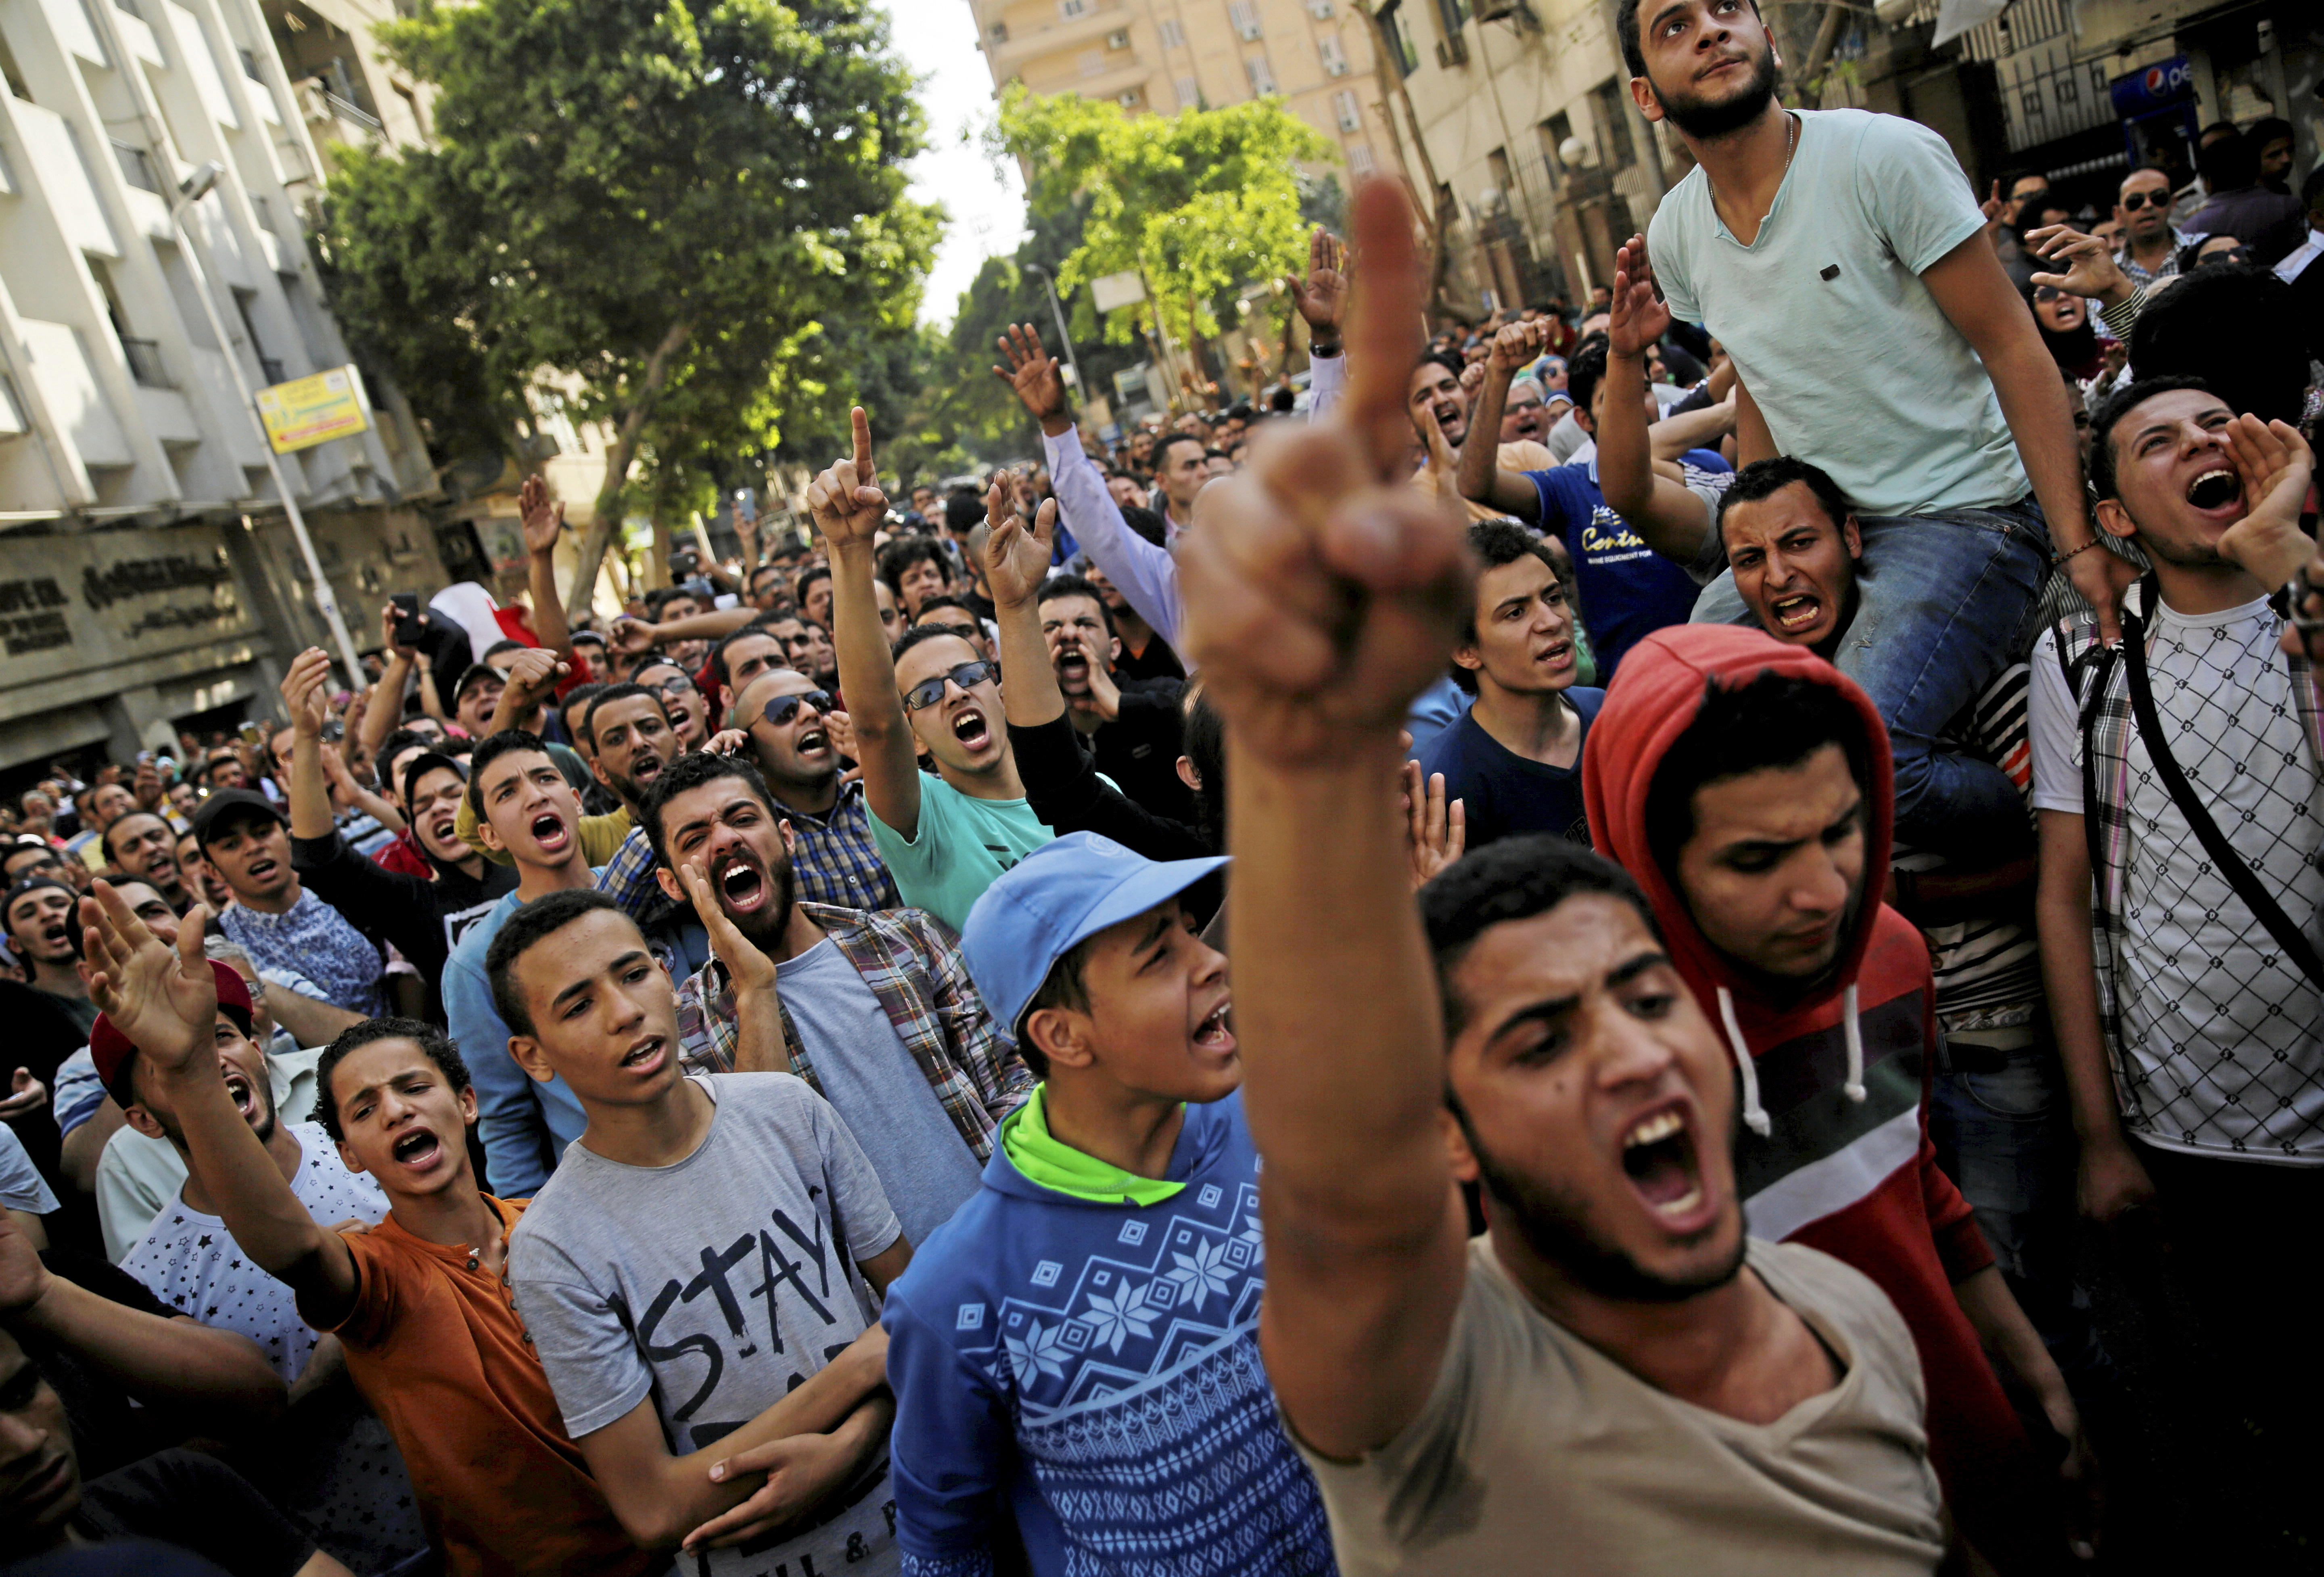 Egyptian protesters and Muslim Brotherhood members shout slogans against President Abdel Fattah al-Sisi and government during a demonstration protesting the government's decision to transfer two Red Sea islands to Saudi Arabia, in front of the Press Syndi